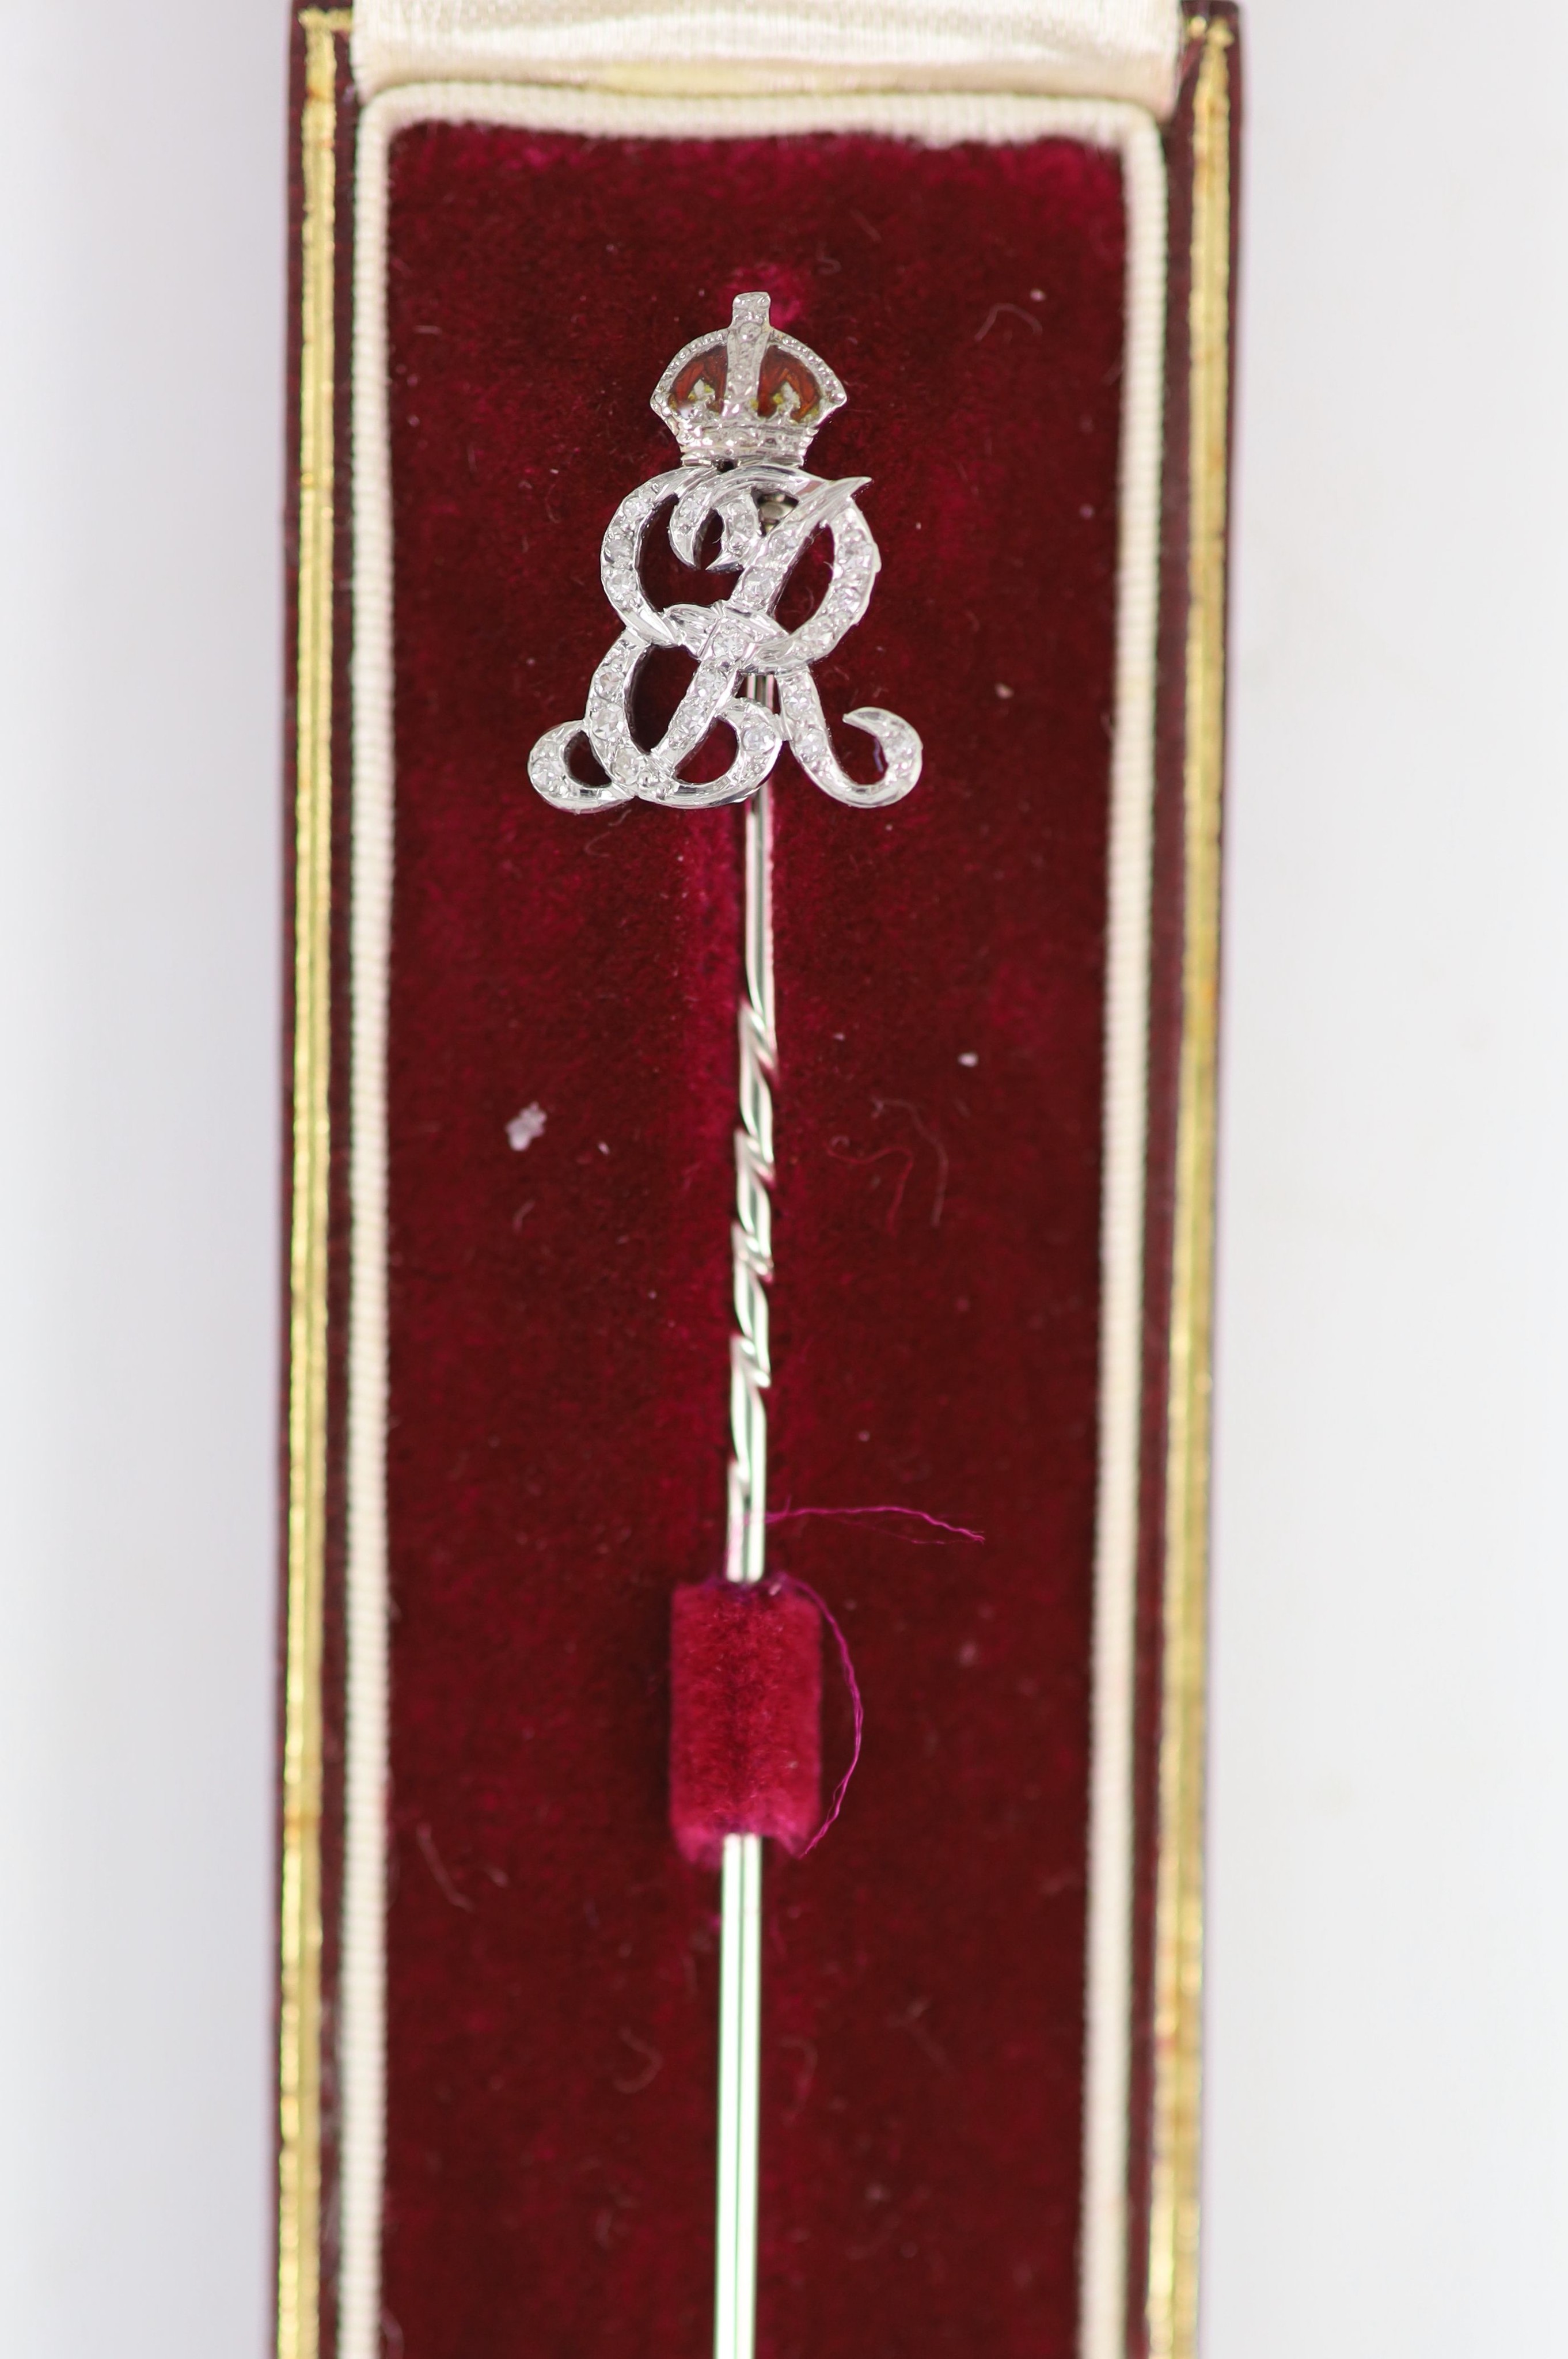 A white gold stick pin with diamond and red enamel monogram ‘’ER’’, beneath a crown, in Collingwood presentation box.